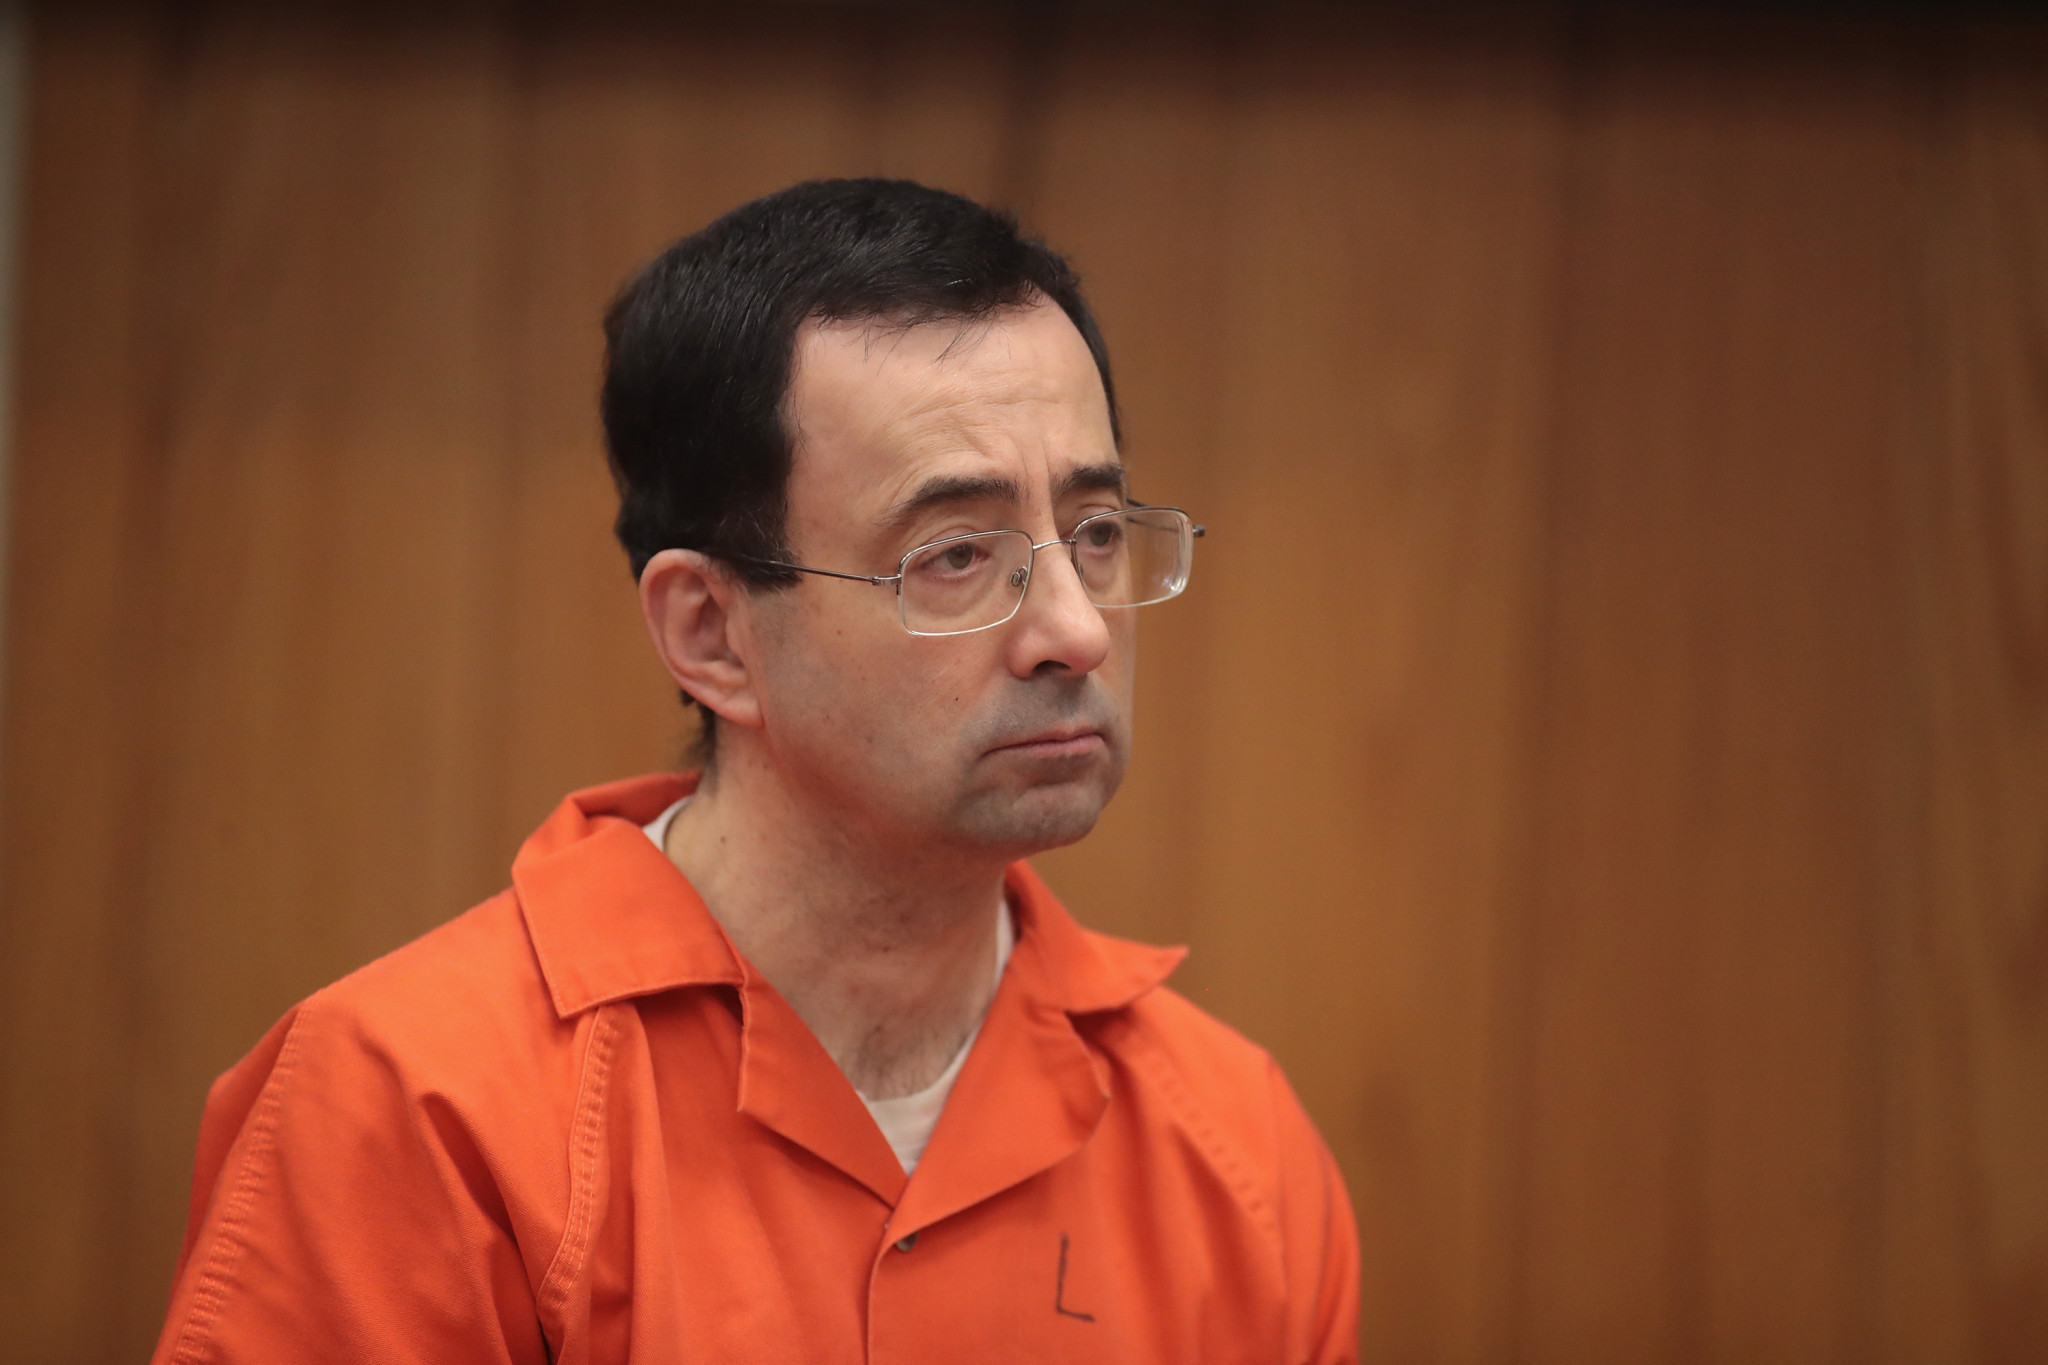 USOC have announced a series of measures following the Larry Nassar sex abuse scandal ©Getty Images